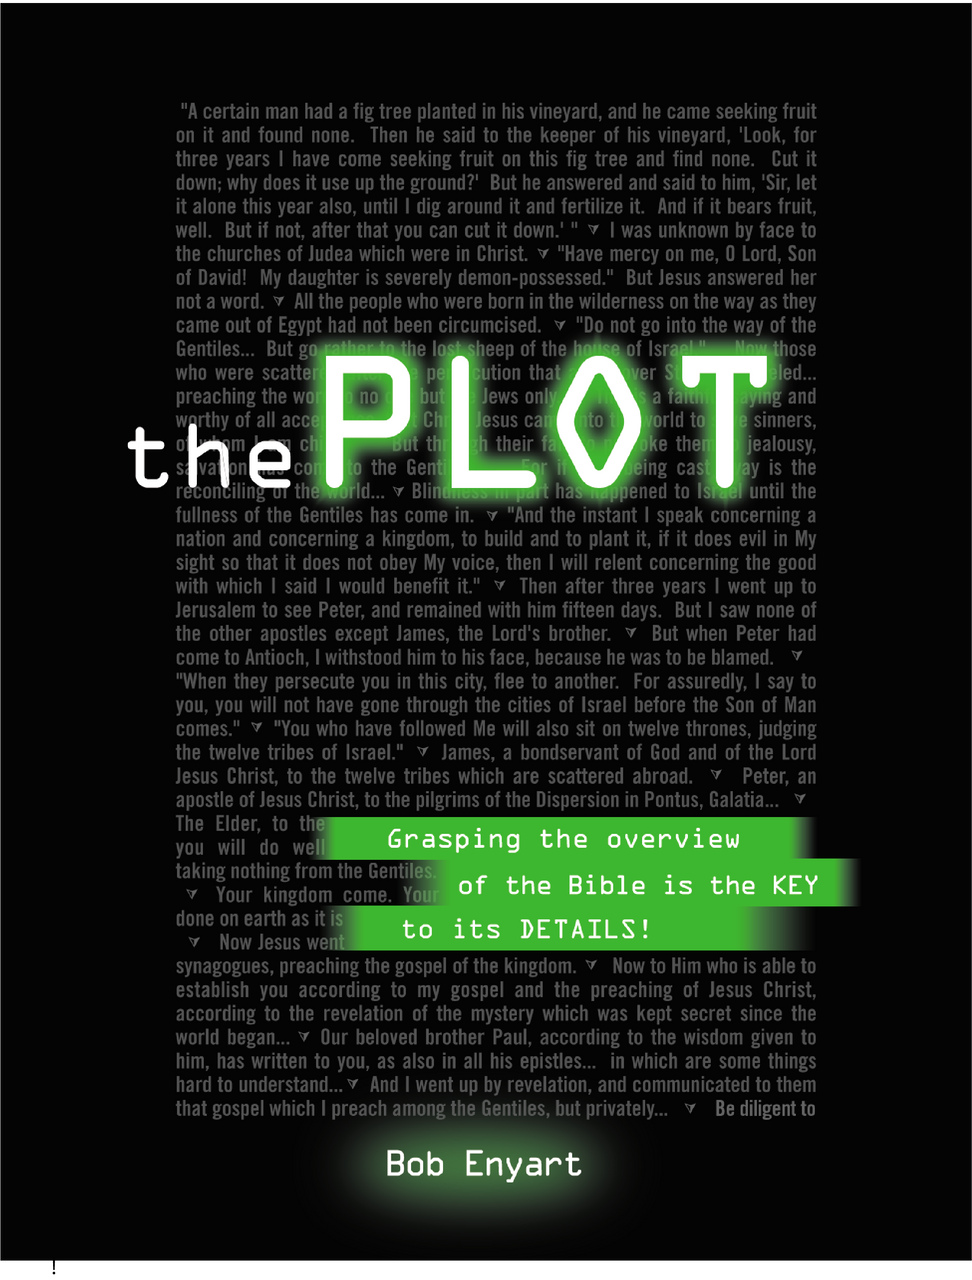 Bob Enyart's life's work, The Plot: The overview of the Bible is the key to its details!